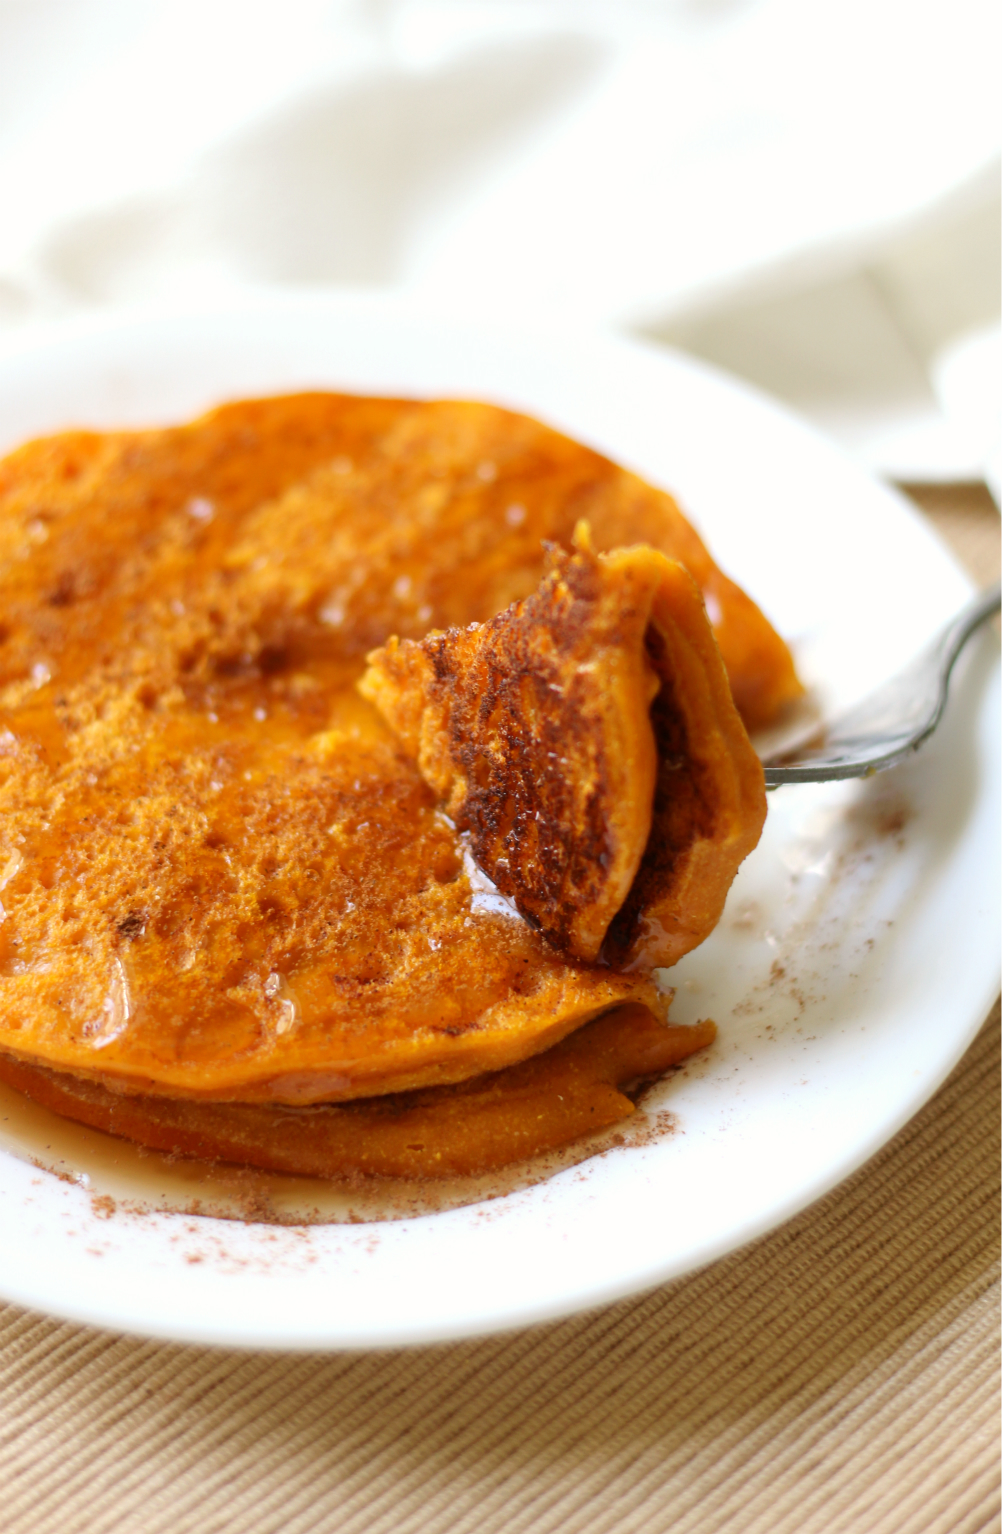 Pumpkin Pancakes | Strength and Sunshine @RebeccaGF666 Simple and delicious pumpkin pancakes in a snap! Gluten-free, vegan, and single-serve, these pancakes are healthy and make a perfect seasonal breakfast recipe any day of the week!